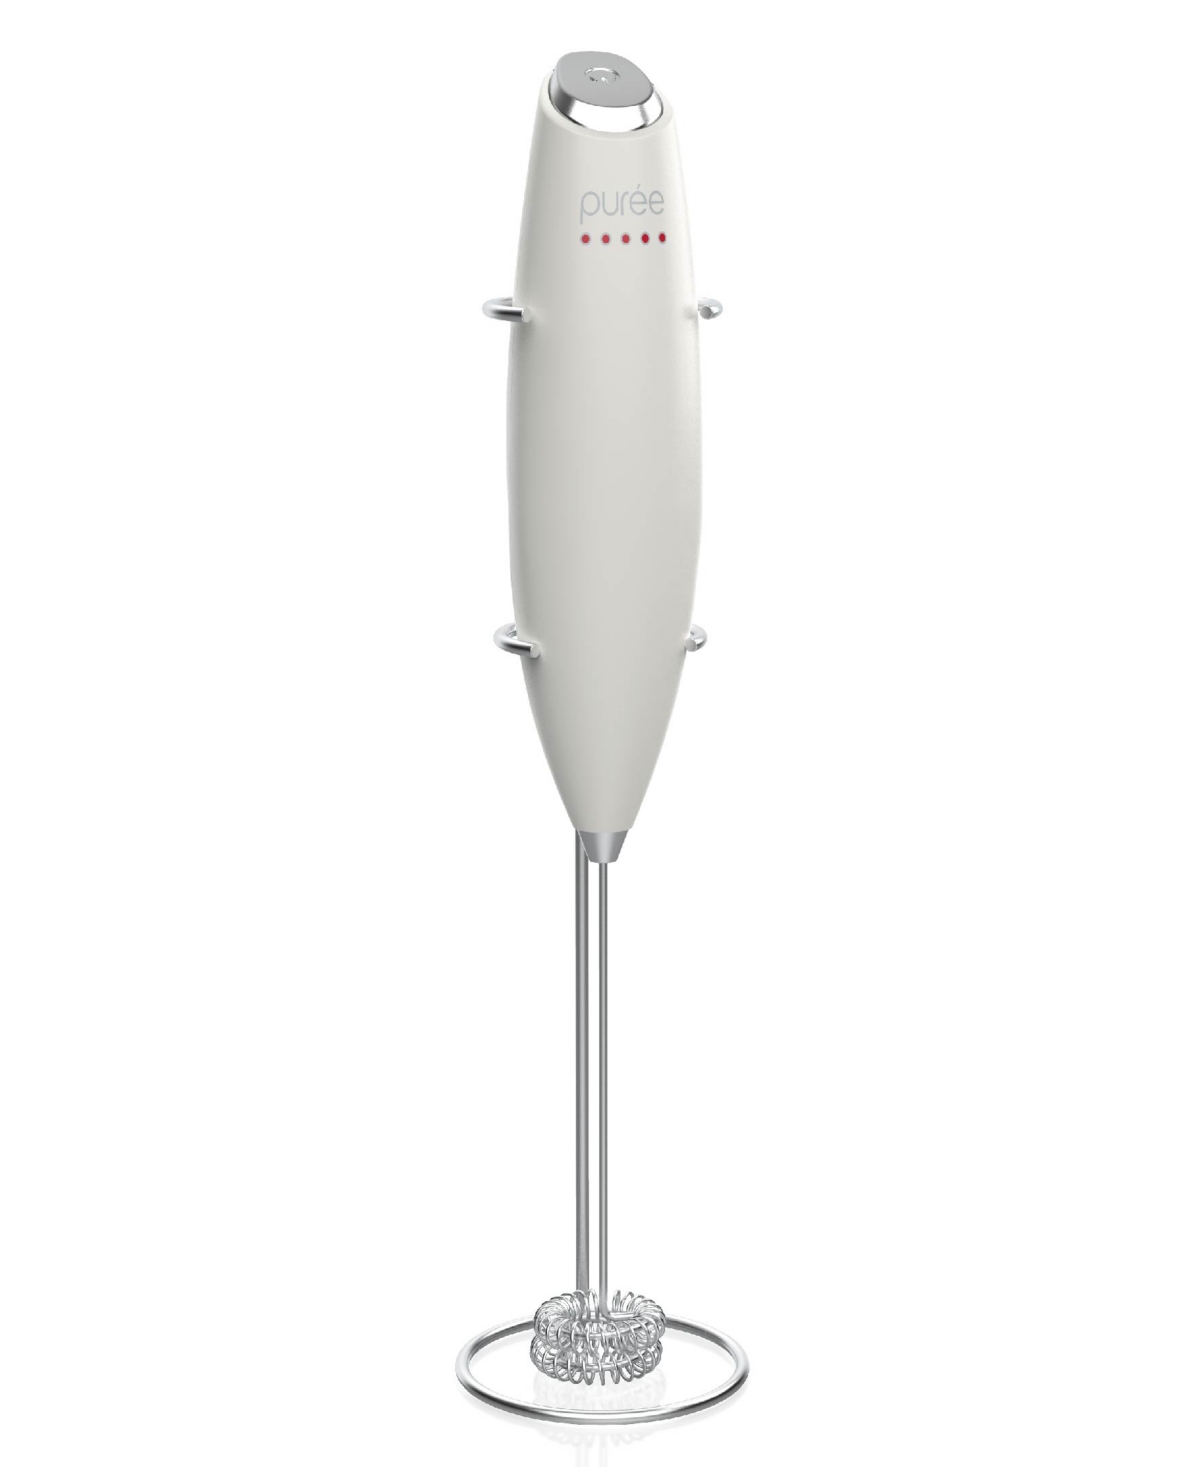 Tzumi Puree Milk Frother, Battery-powered Handheld Milk Frother Wand In White